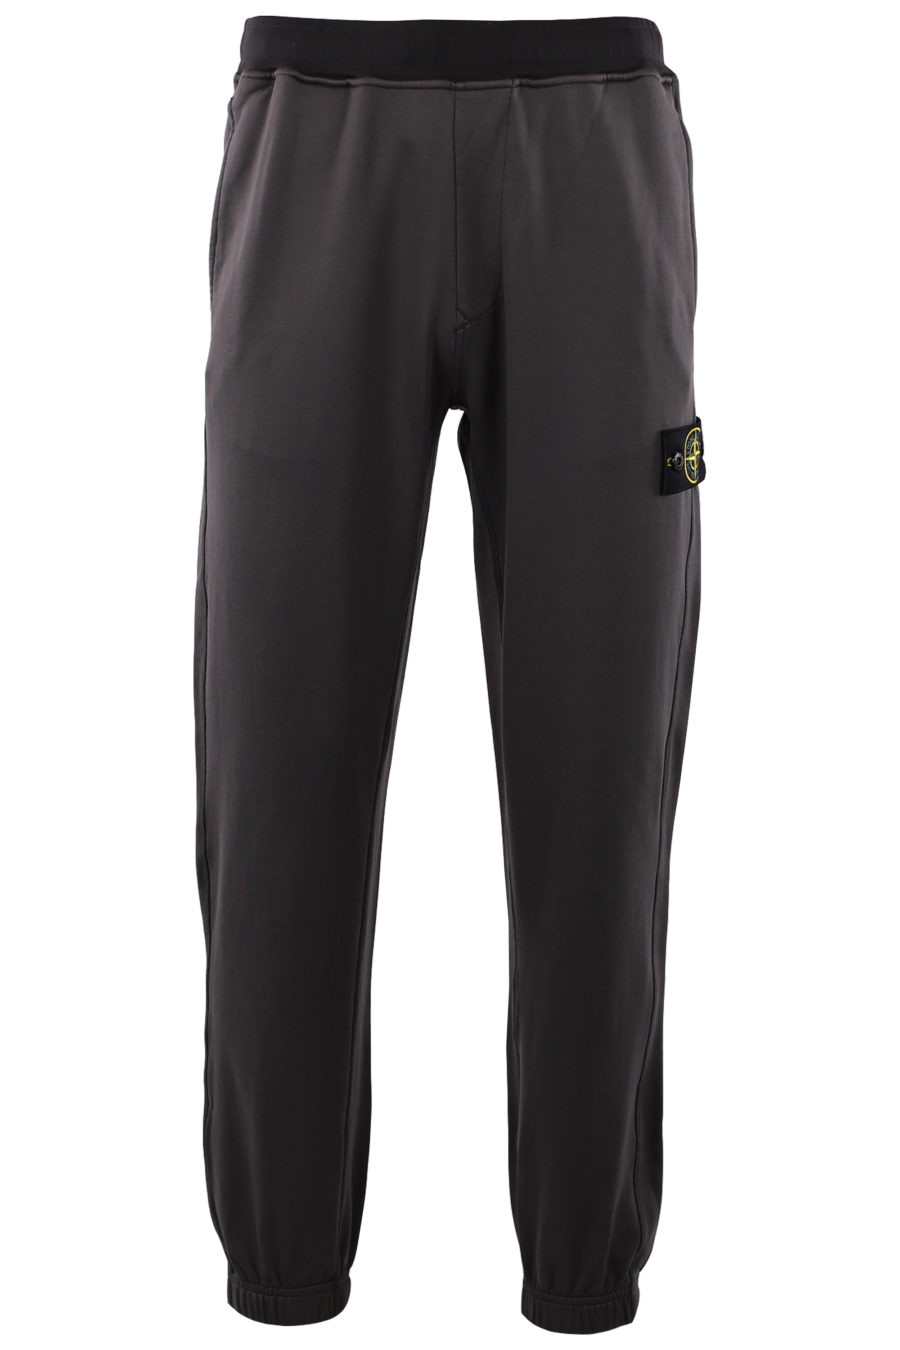 Metallic grey trousers with logo patch - IMG 9170